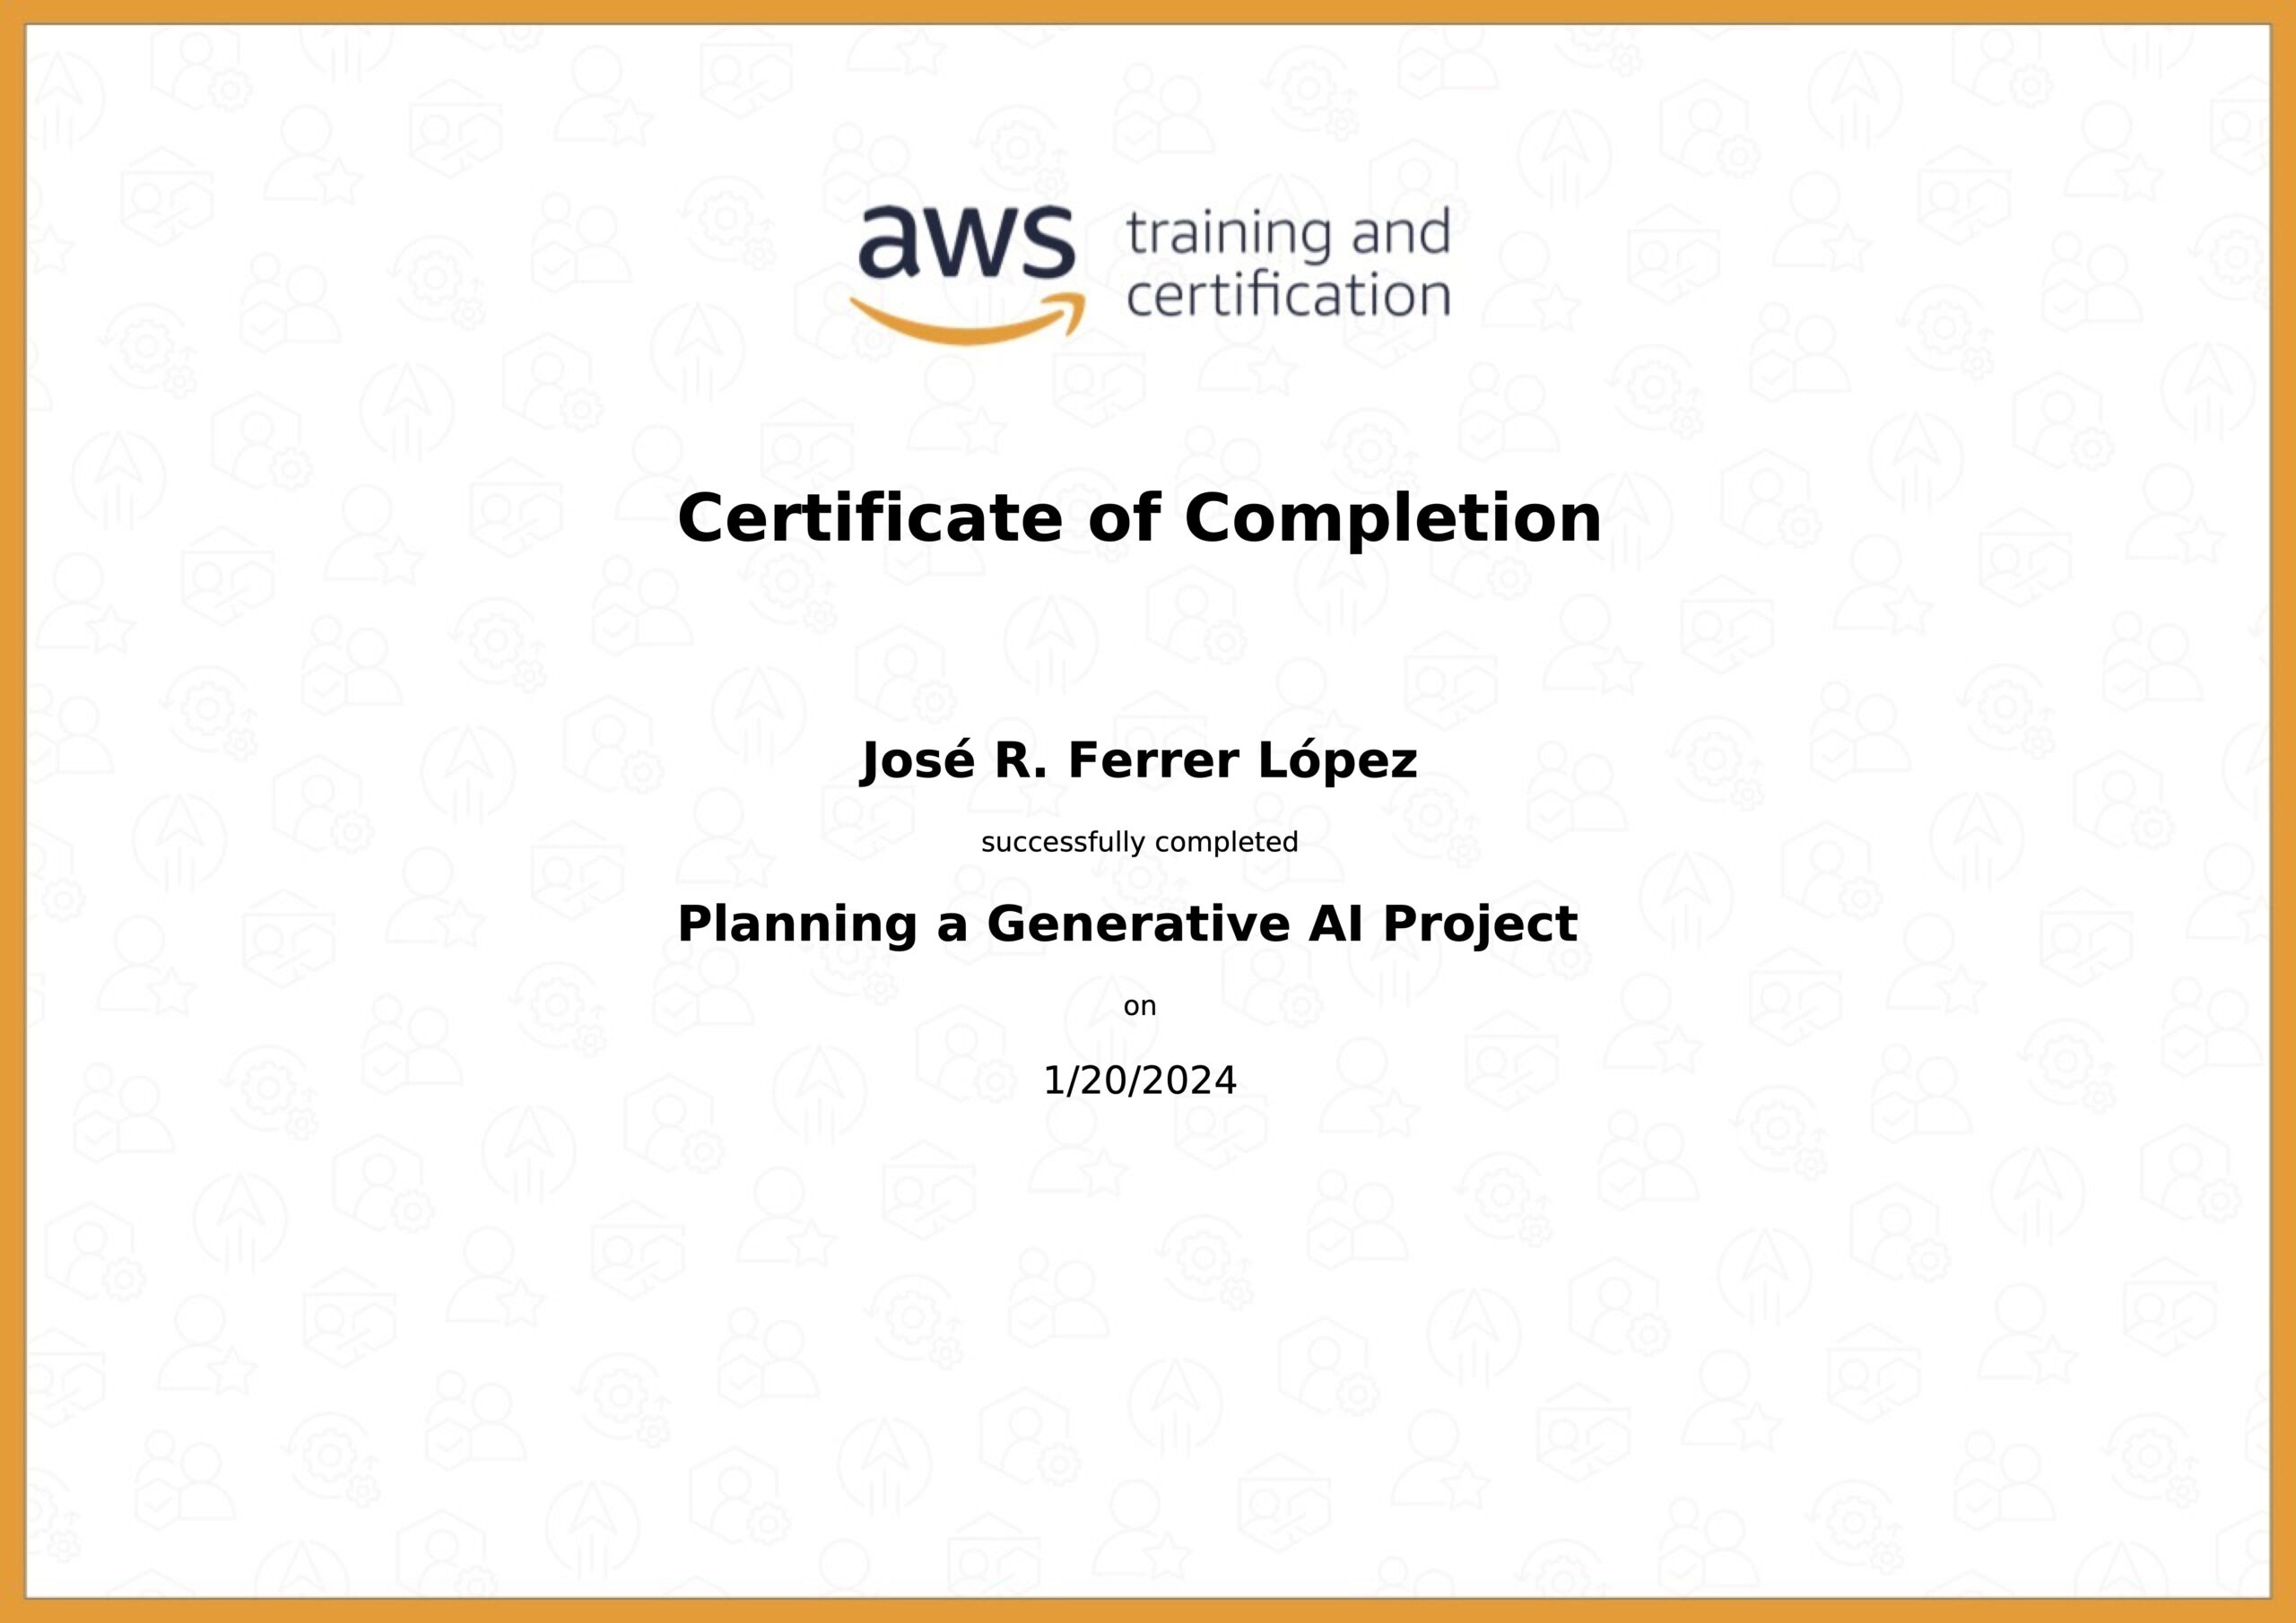 17256_5_4821872_1705772195_AWS Skill Builder Course Completion Certificate